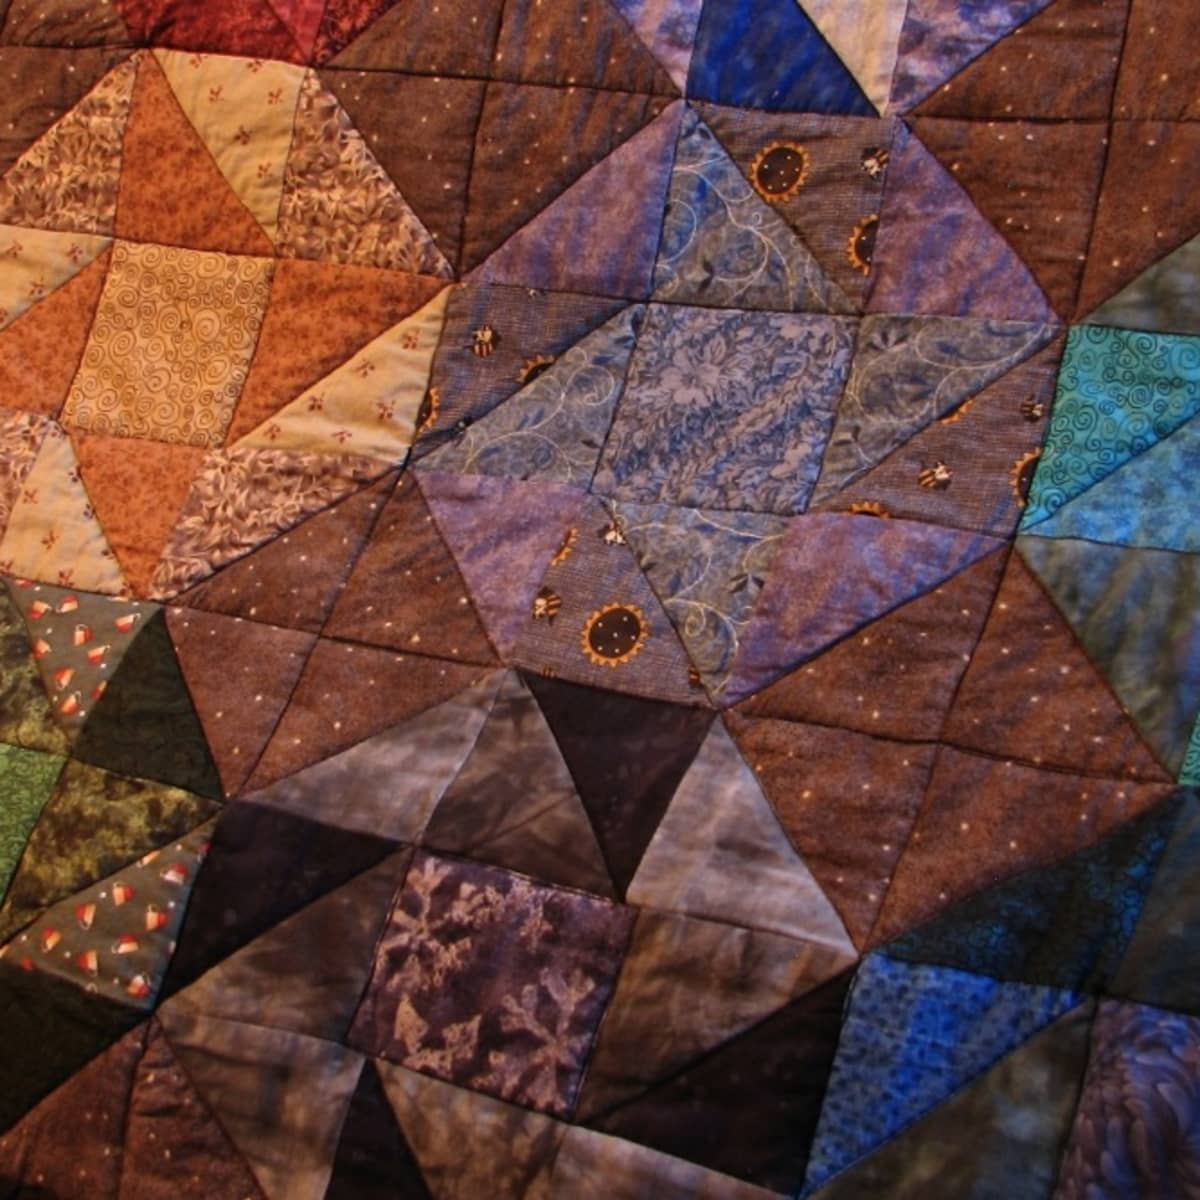 How to Make a Simple Patchwork Quilt - FeltMagnet